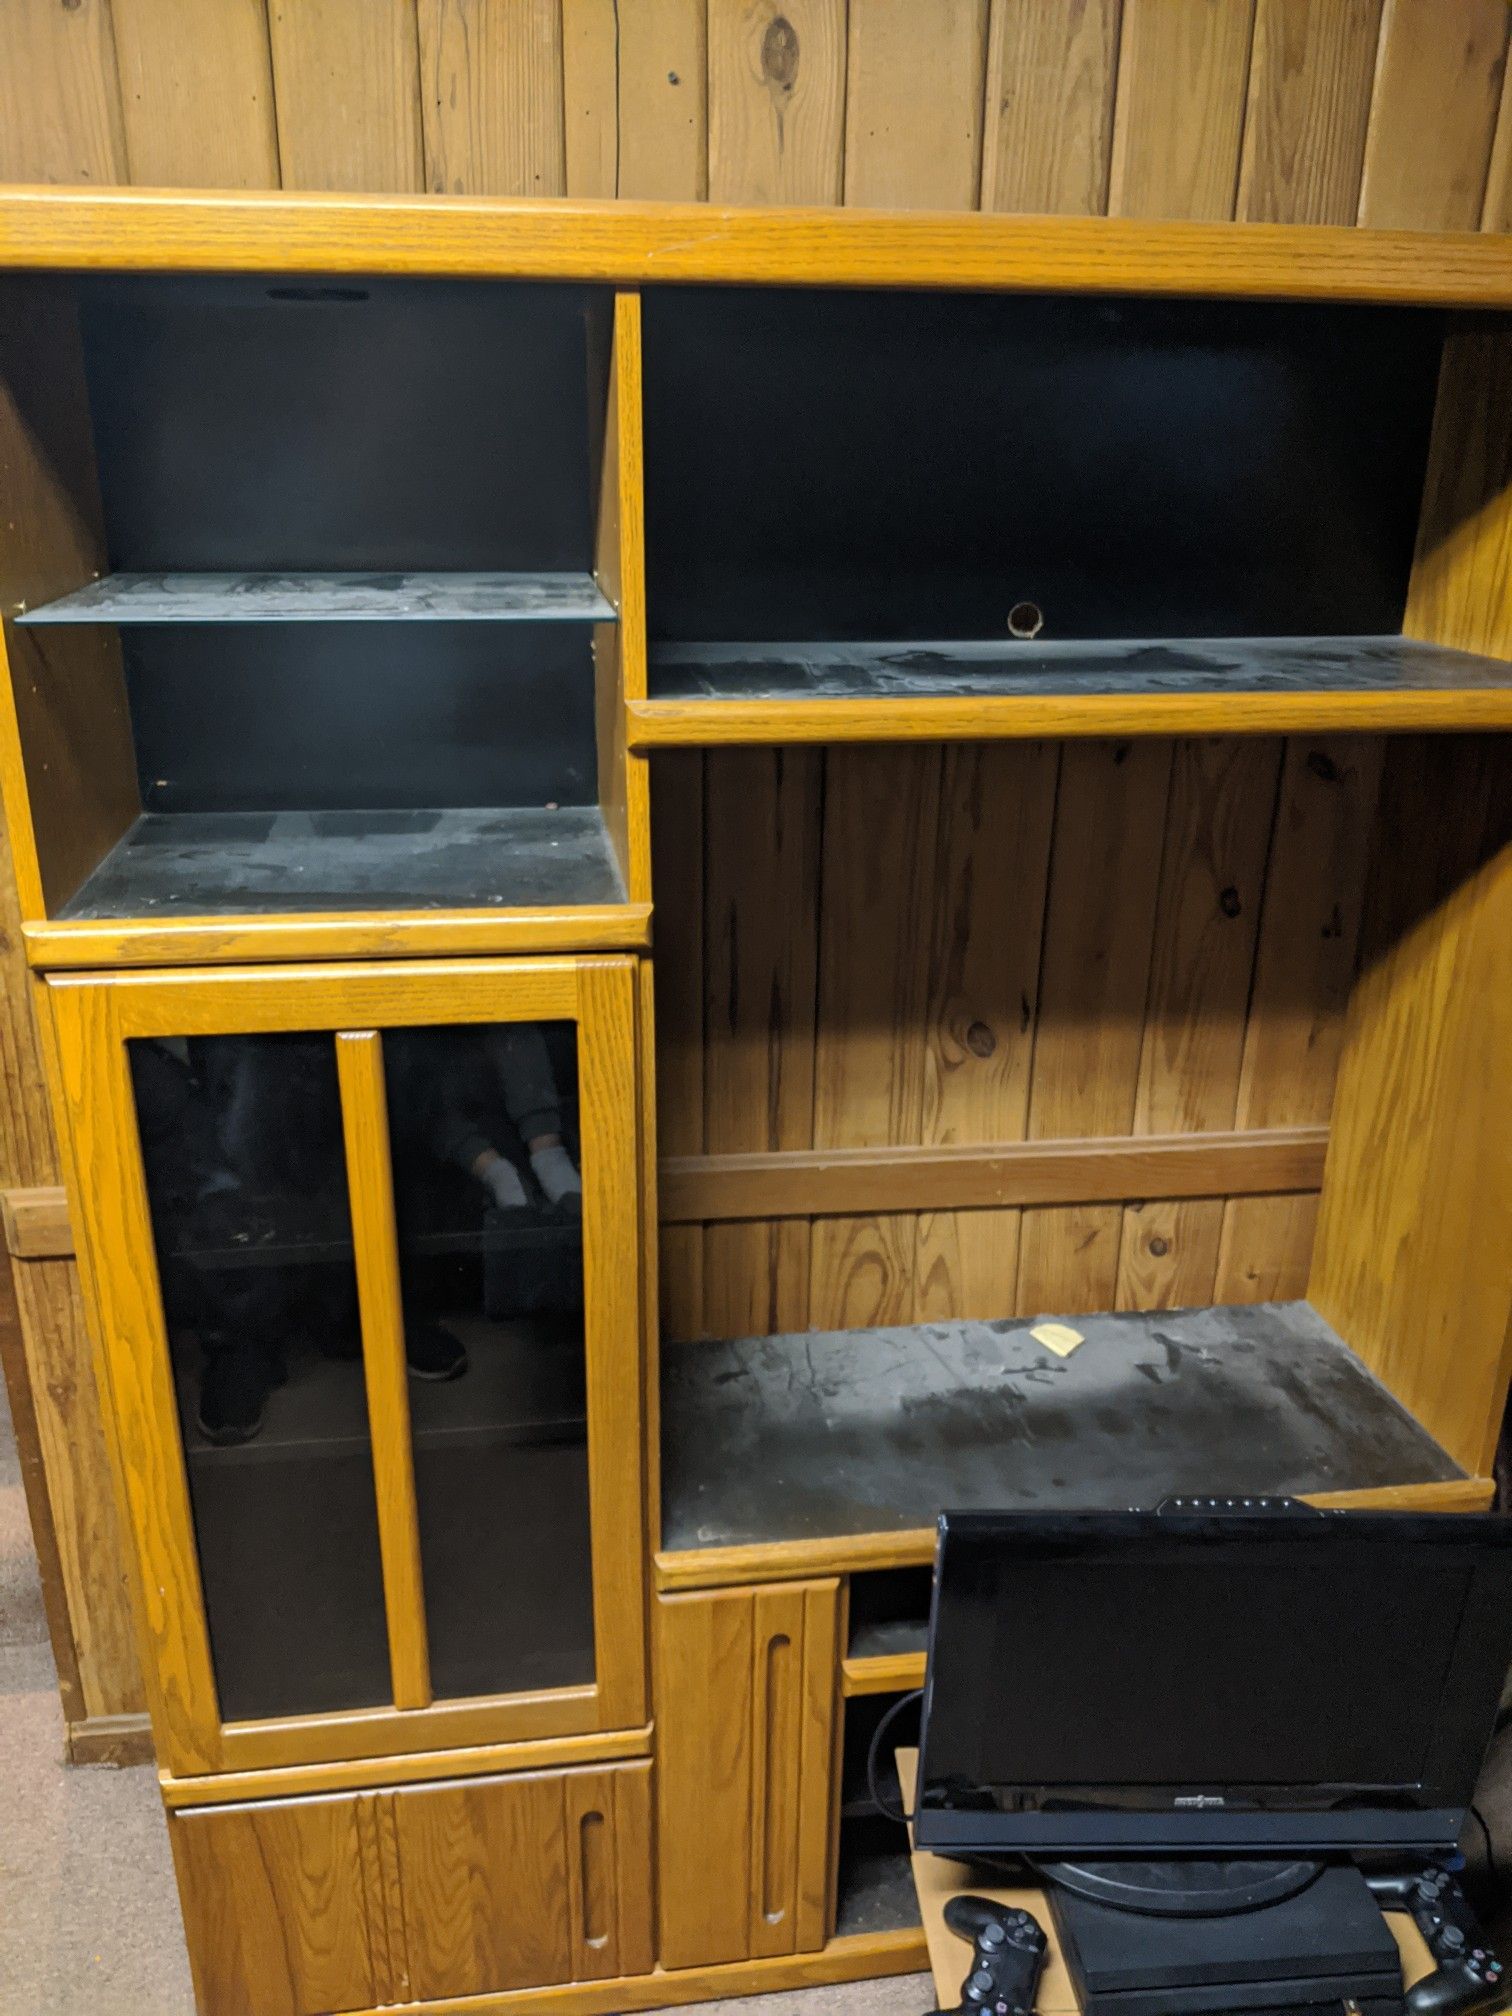 * REAL WOOD TV STAND ***FREE*** Curio lighting and glass shelves